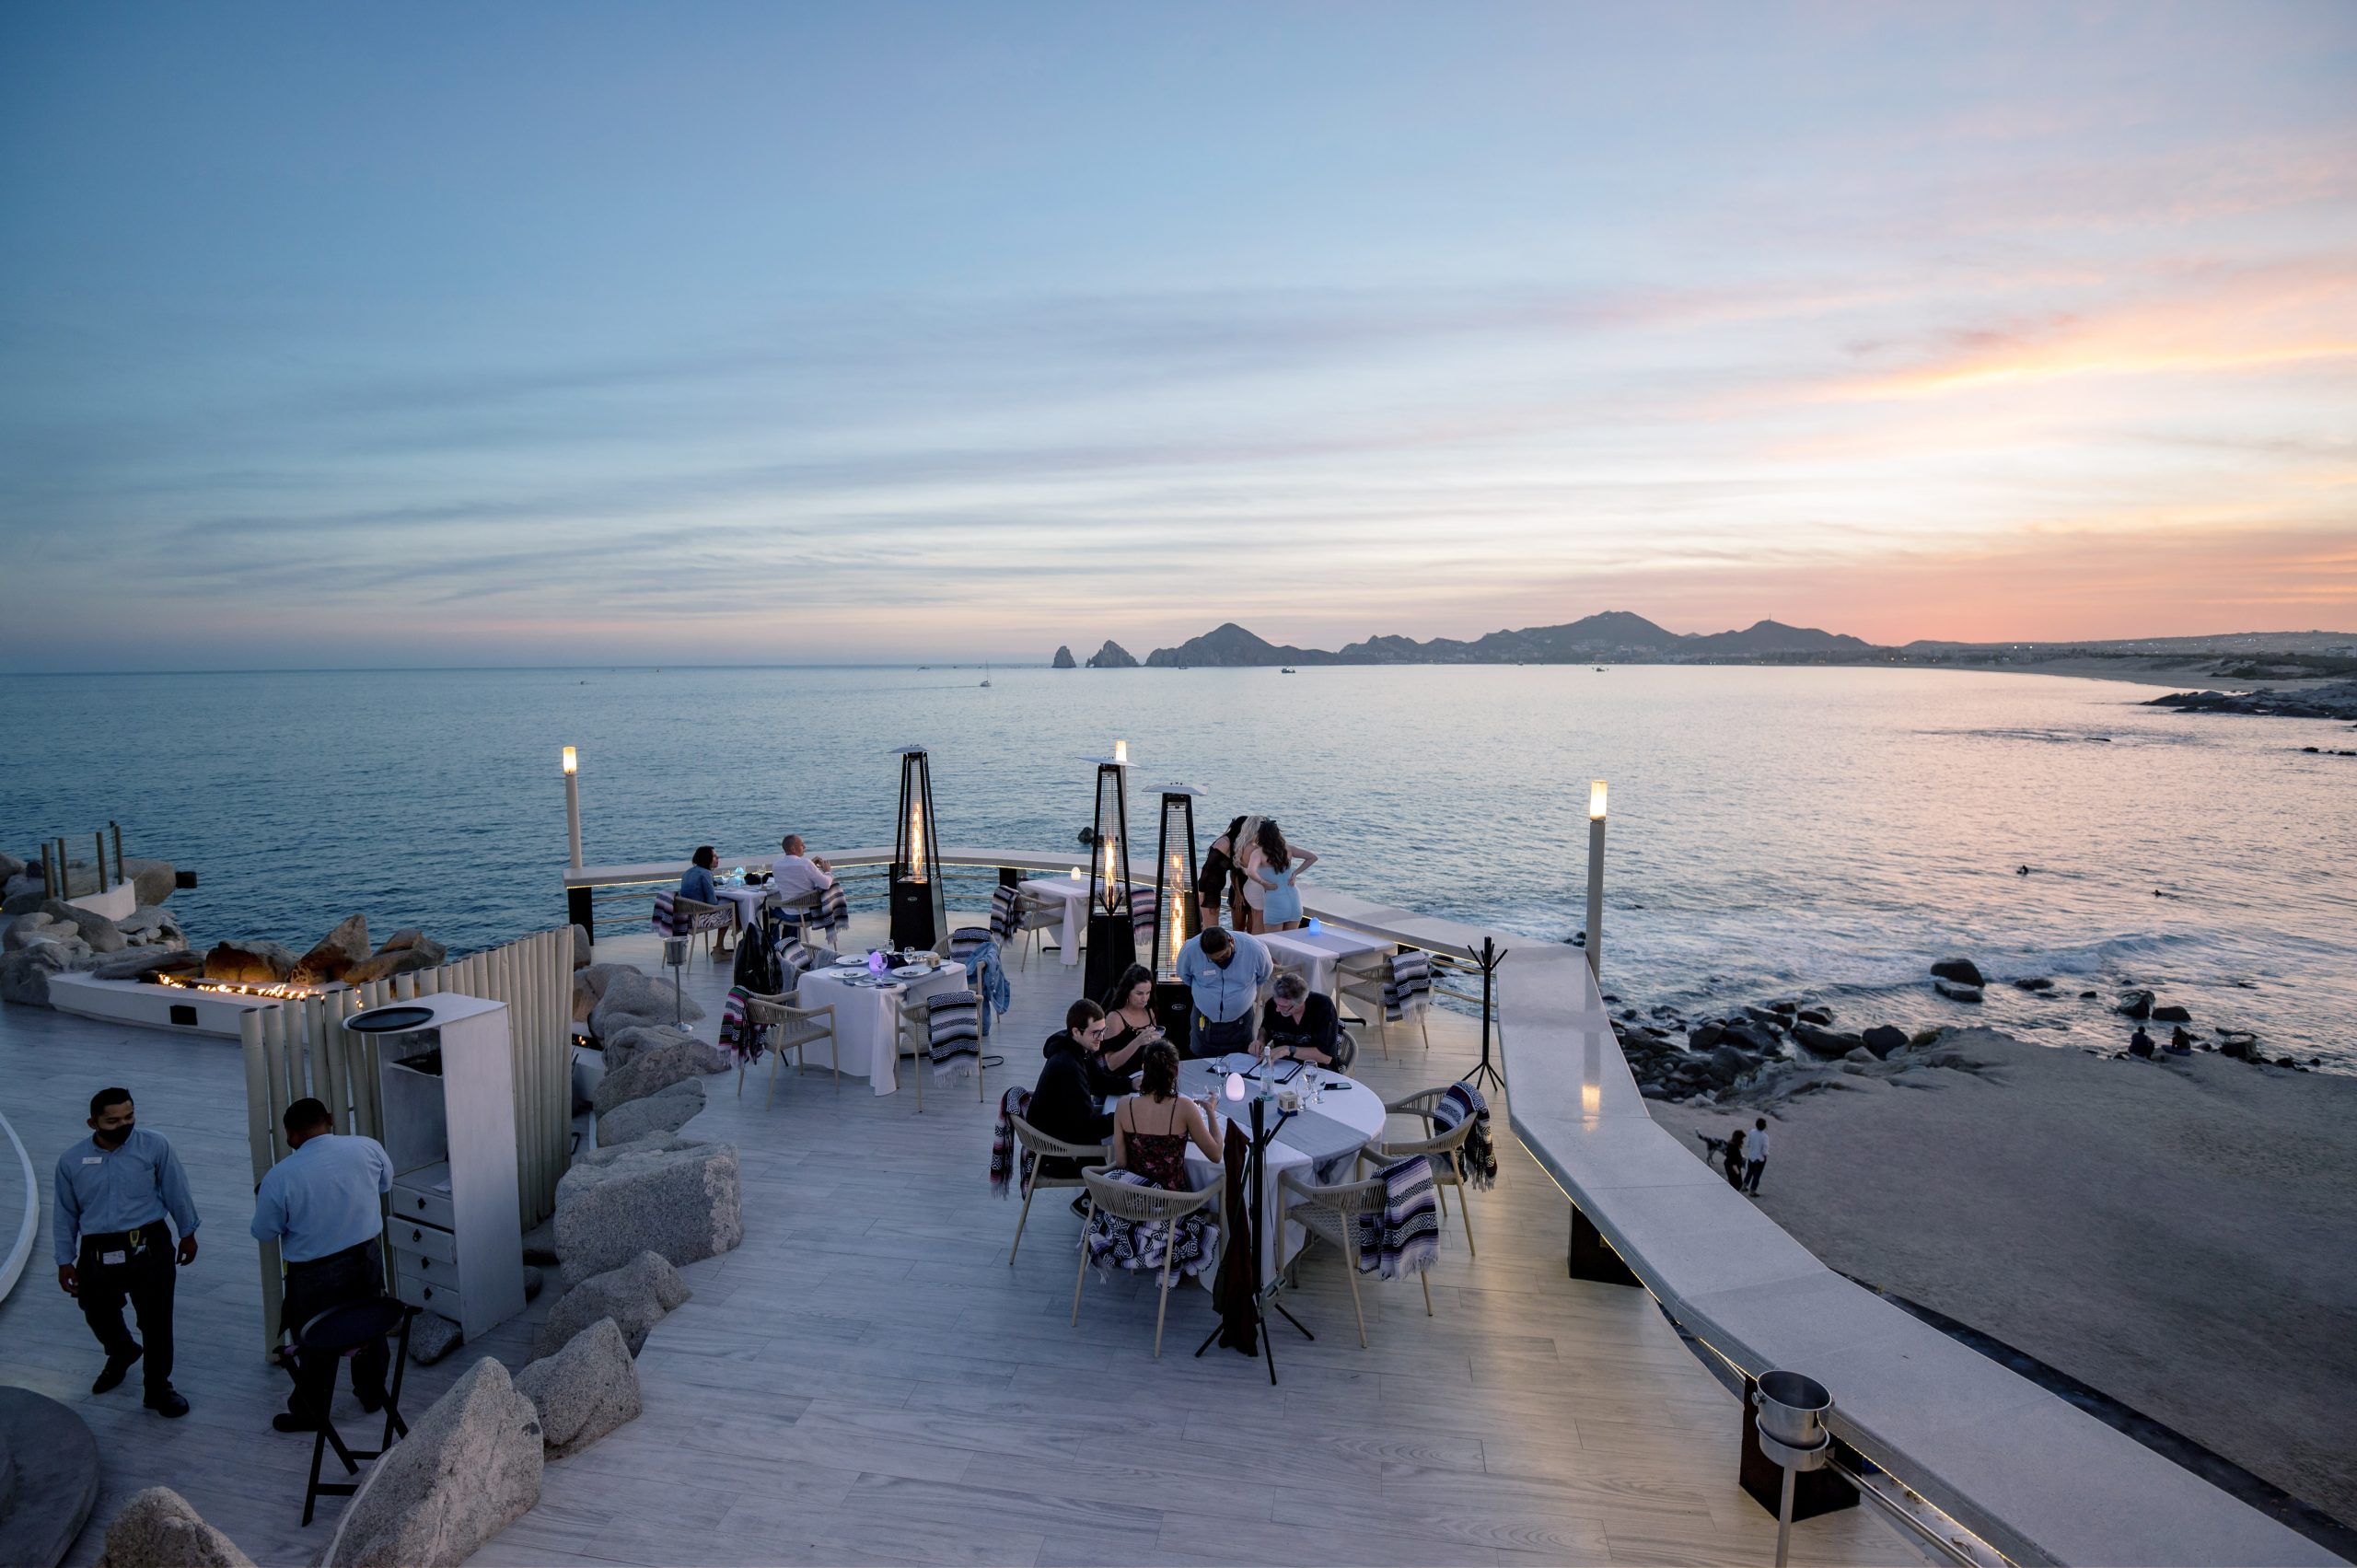 Valentine's Day Dining in Cabo San Lucas Mexico